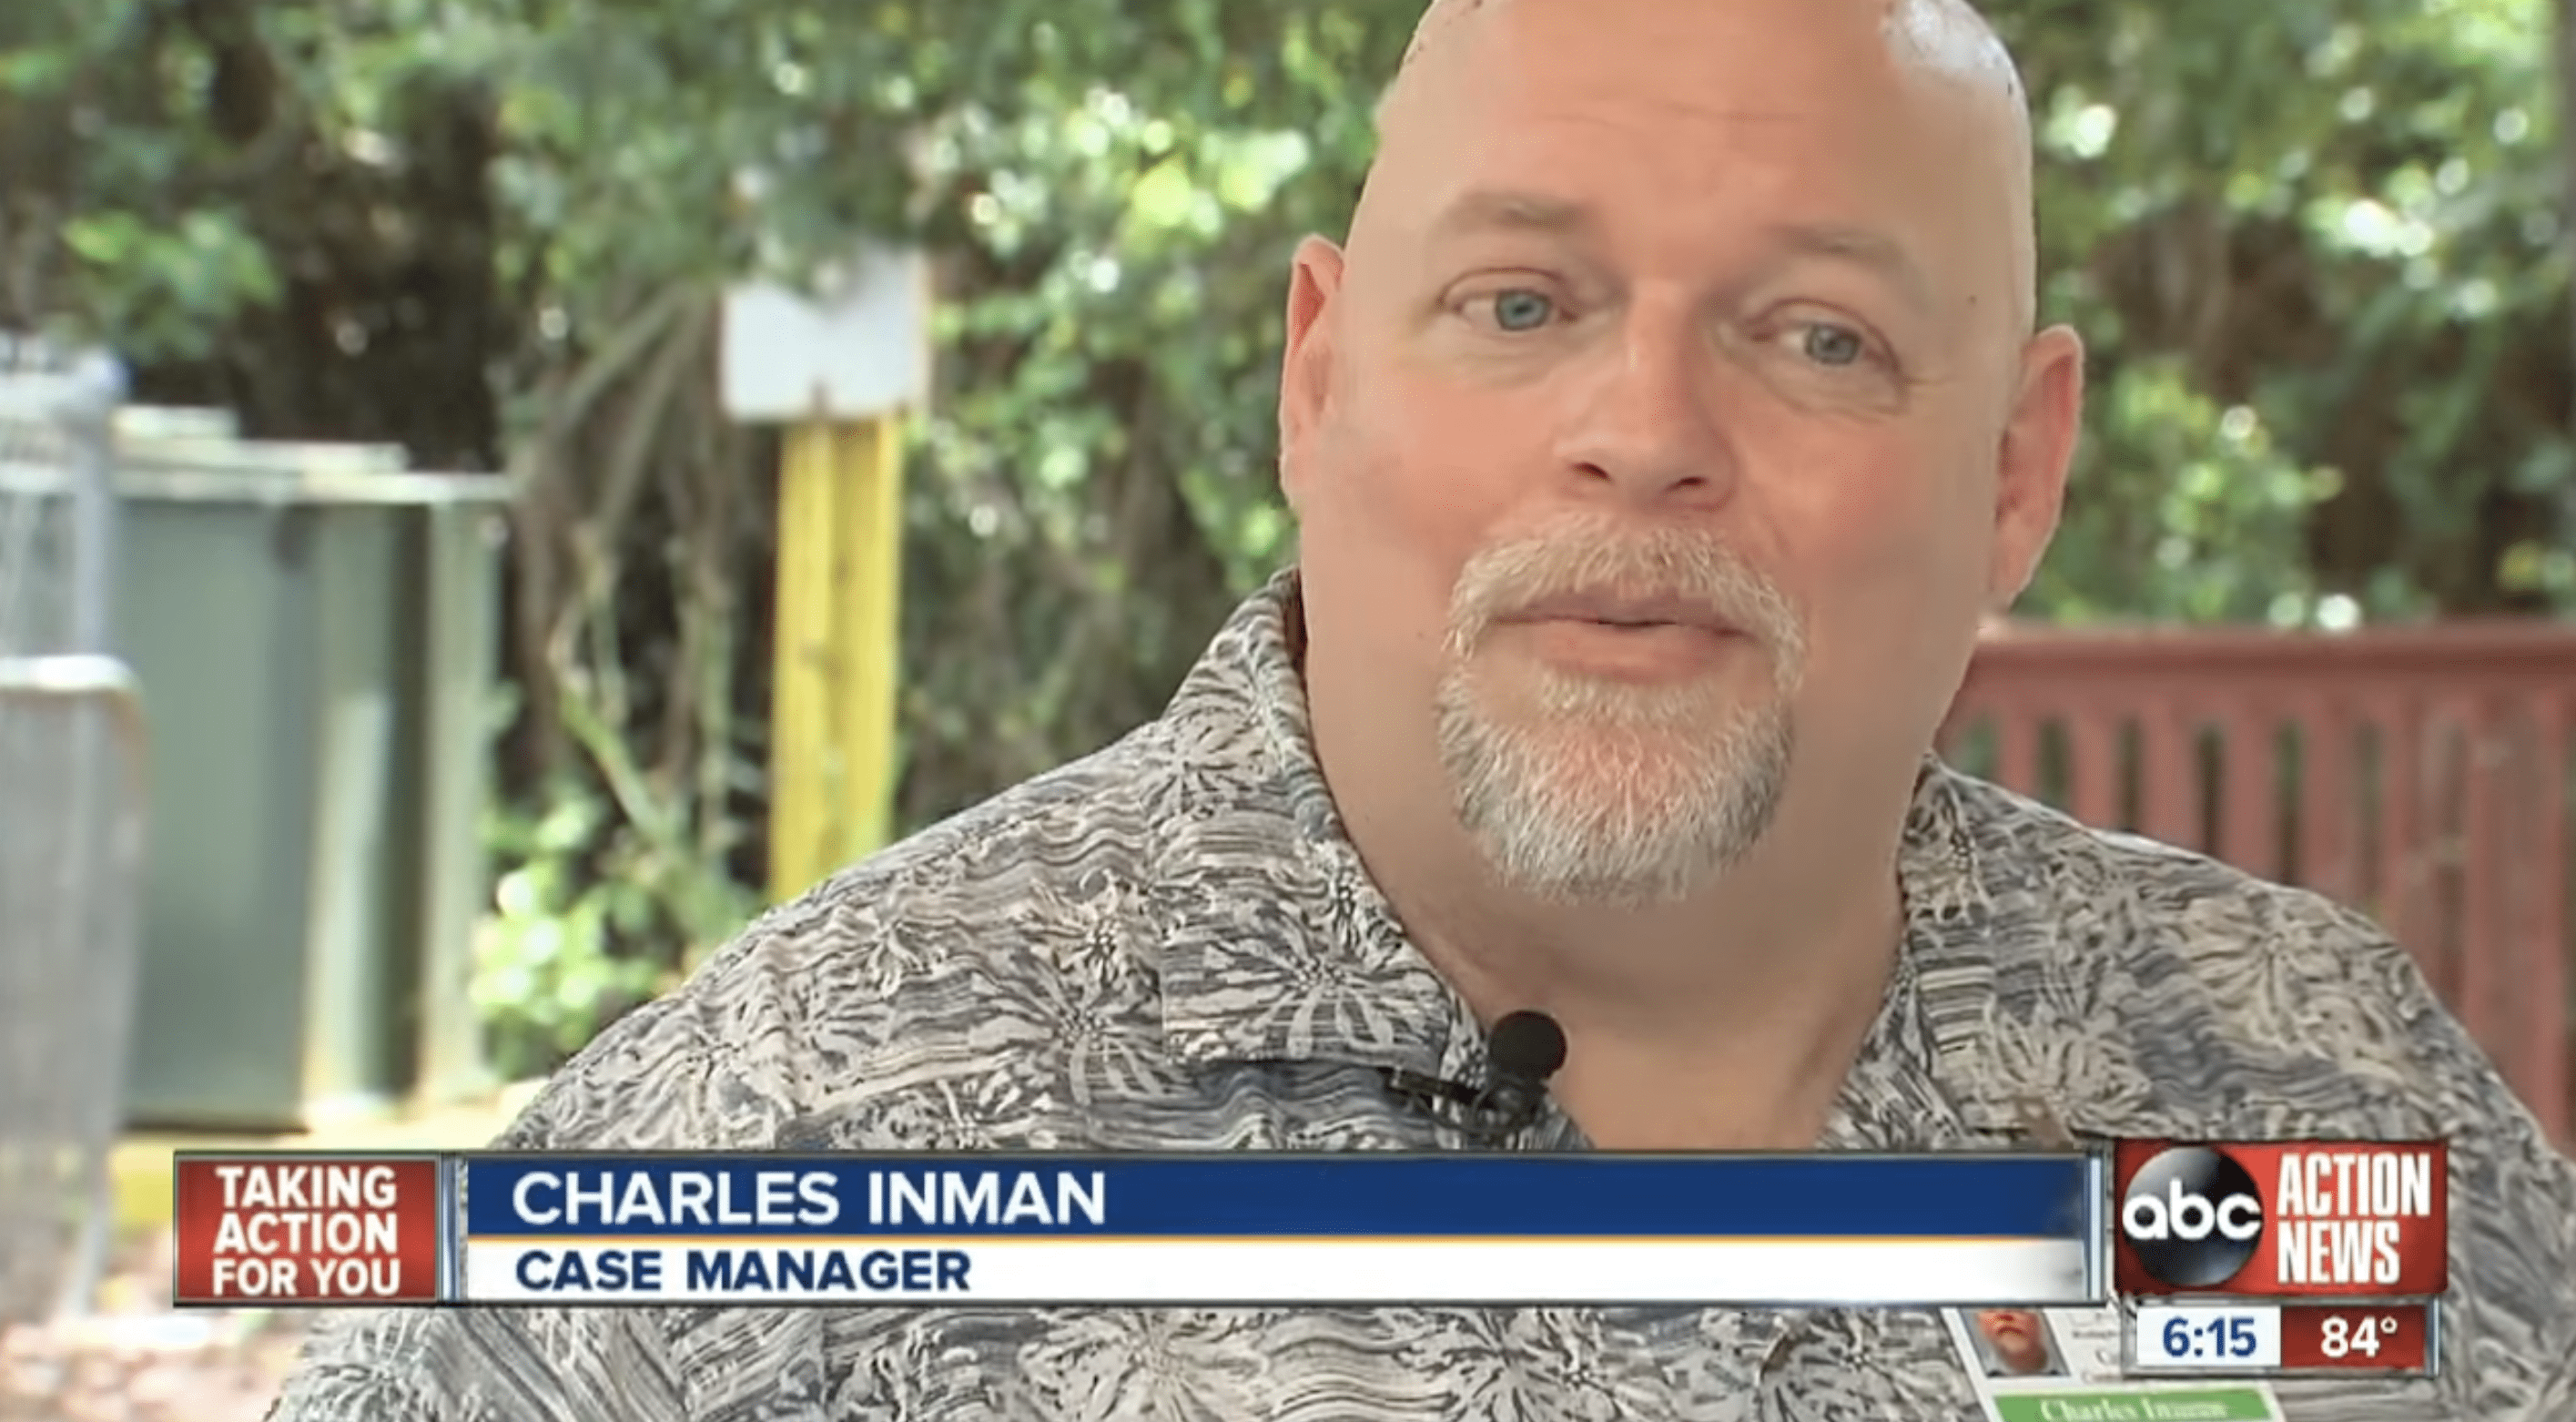 DACCO Case Manager Charles Inman helped Helinski find housing and social security benefits. | Photo: YouTube.com/ABC Action News